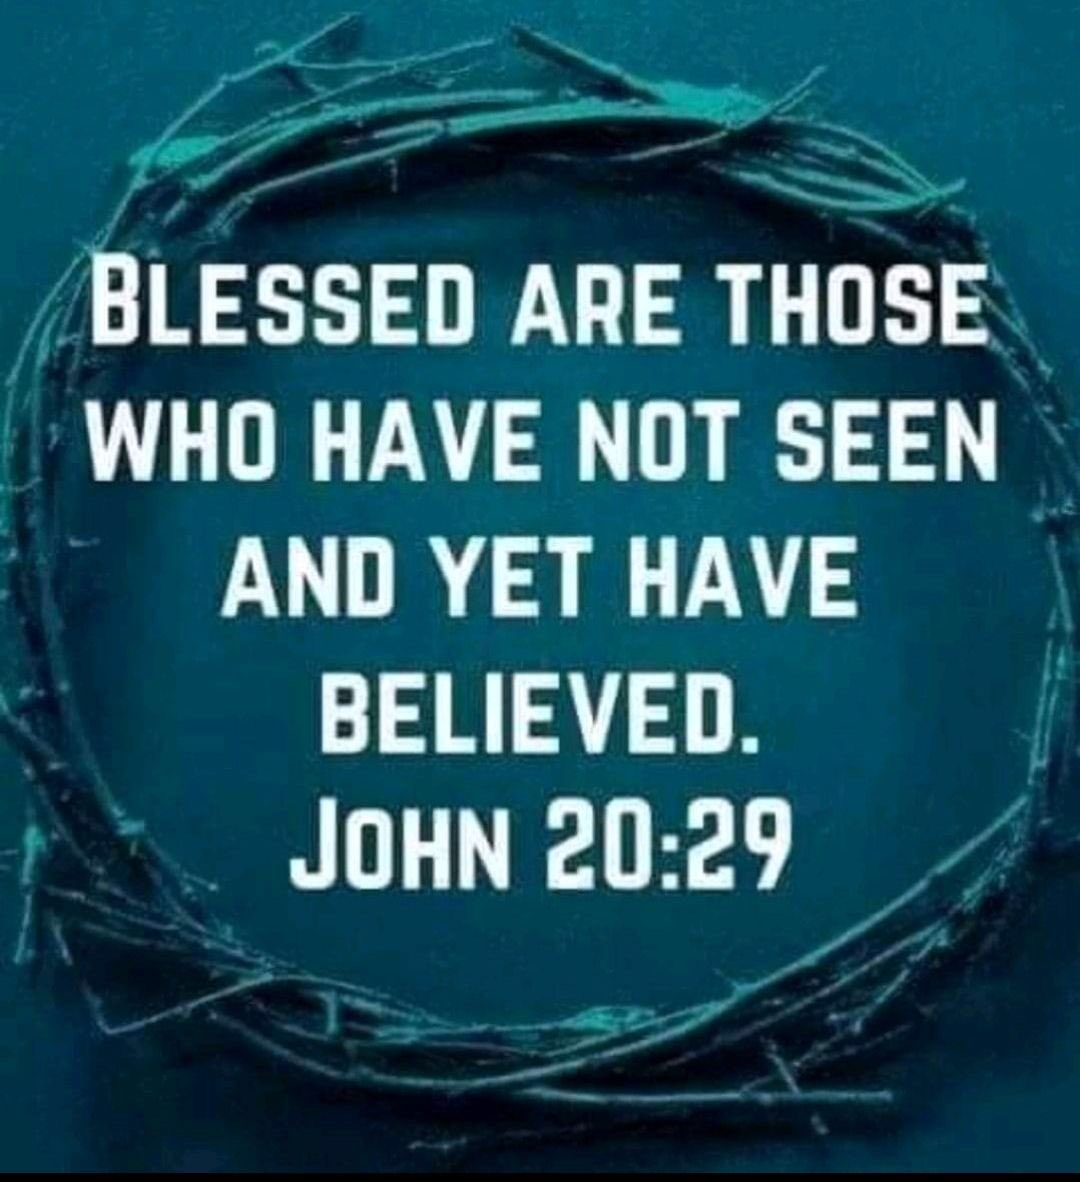 Blessed Are Those Who Have Not Seen And Yet Have Believed.🙏John 20:29 @1Nicdar @EL4USA @CJSzx12 @HPY2KW @45Gigi24 @TwinsBus @Bert7058 @Astud987 @gildea_leo @SULLY10X @locoashes @bdonesem @Rammie24 @SirFlyzalot @Robitysom @roybearcat @TJLakers01 @3030bubba